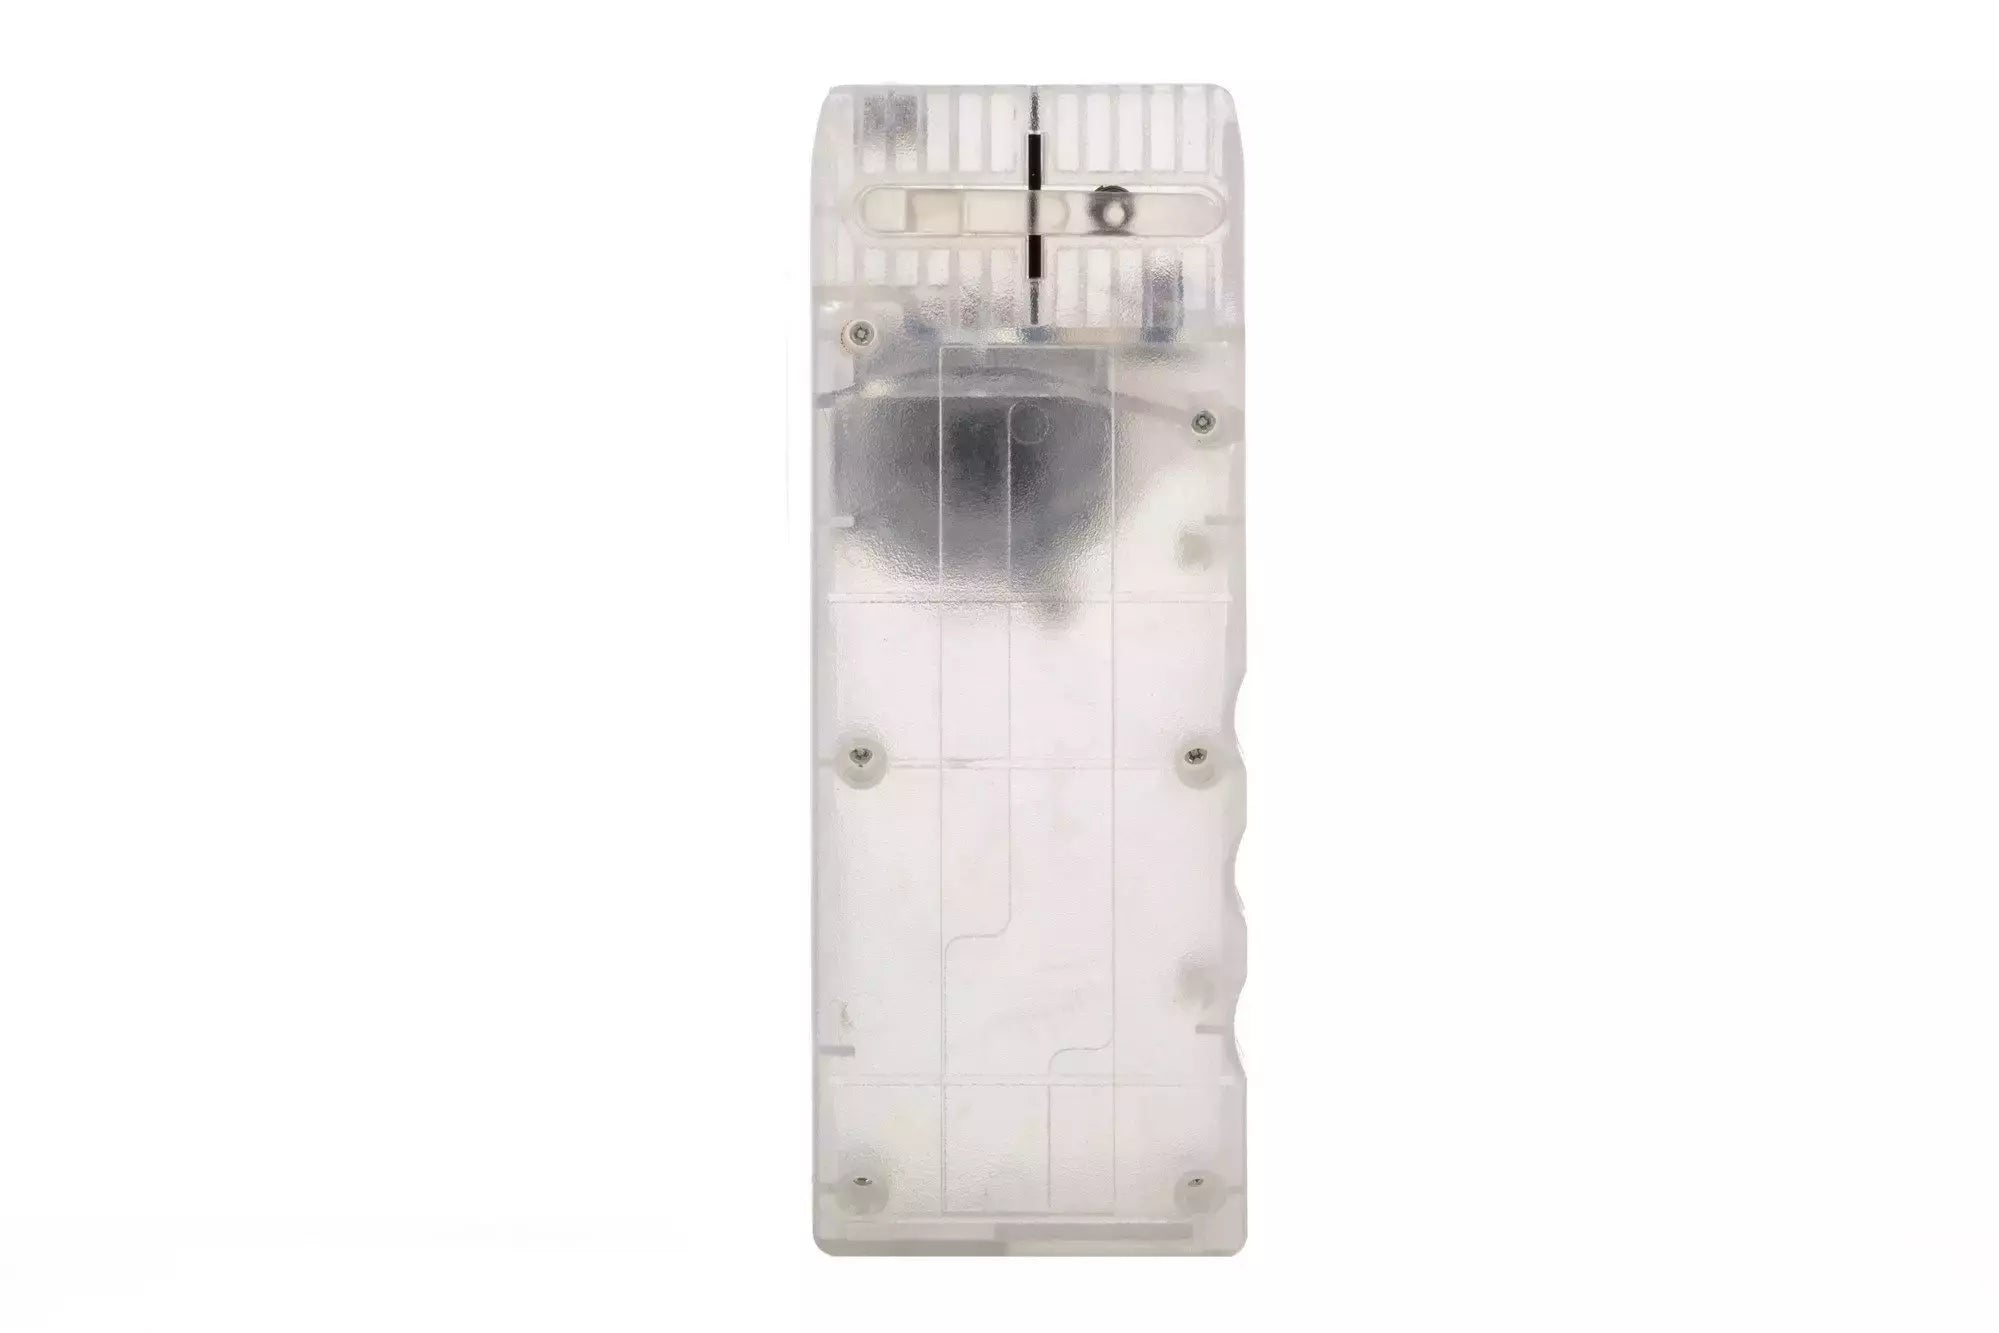 M4/M16 Magazine Speedloader with handle - Clear